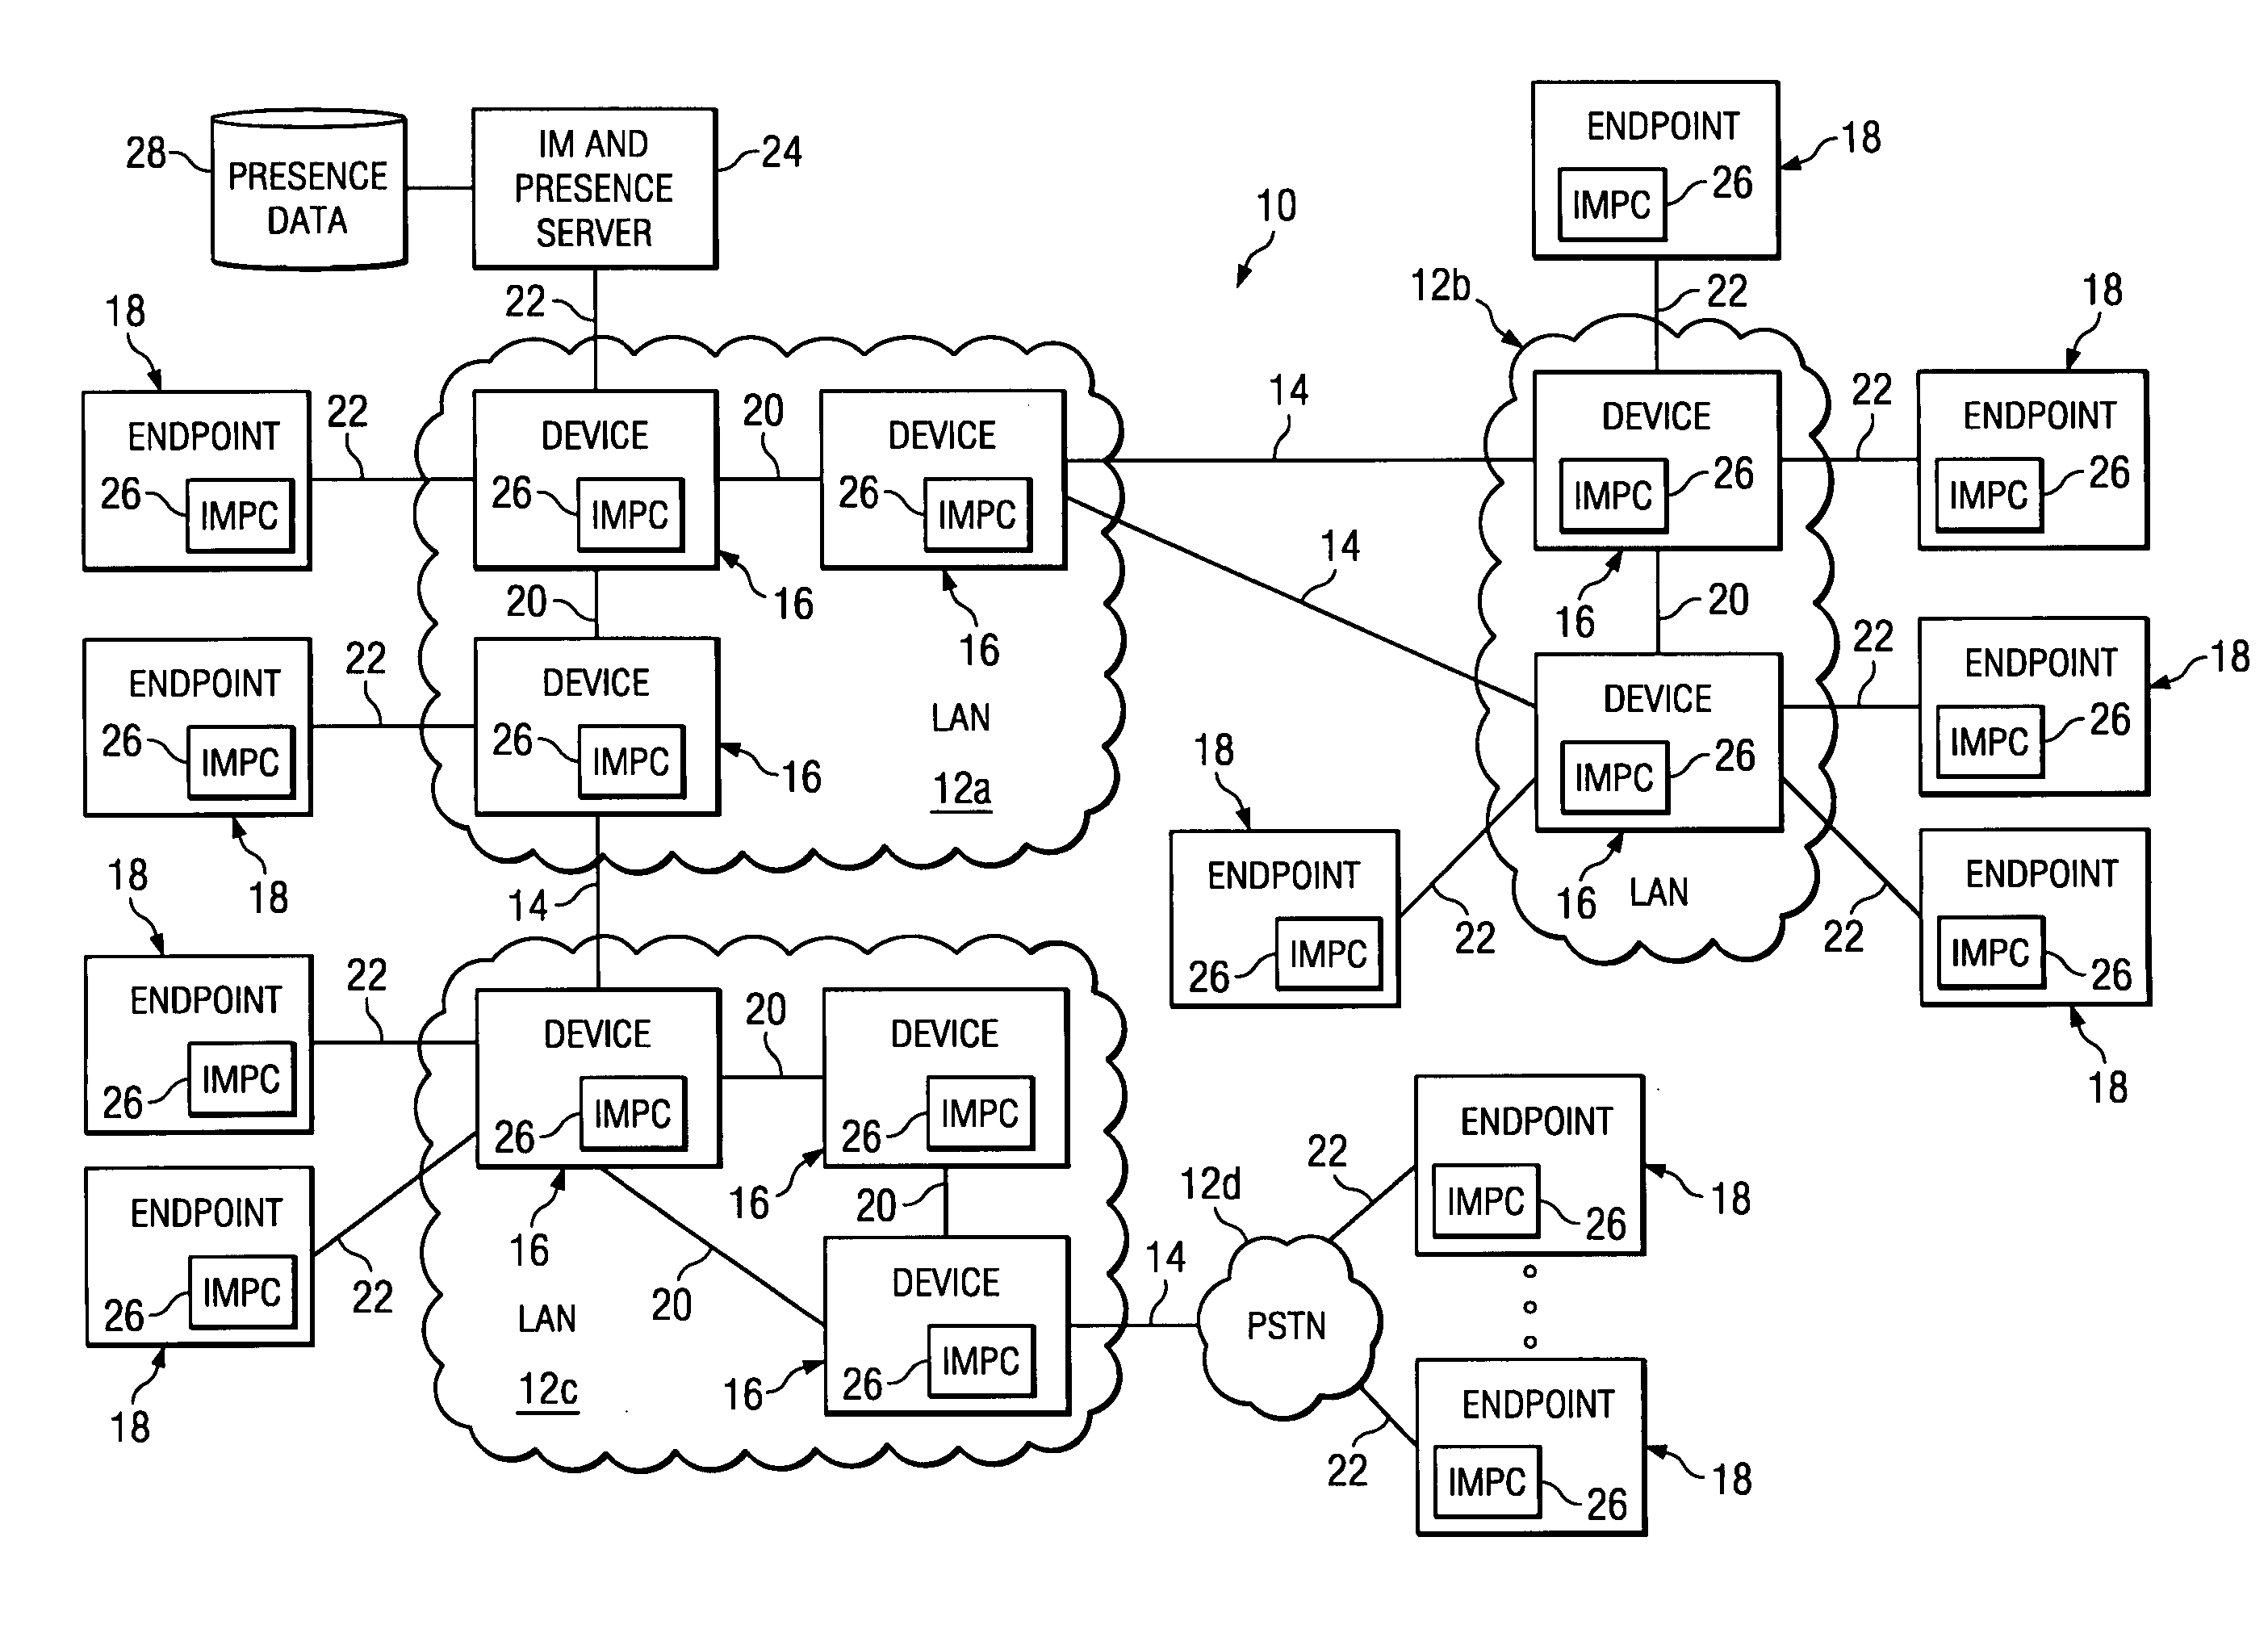 Presence-based management in a communication network